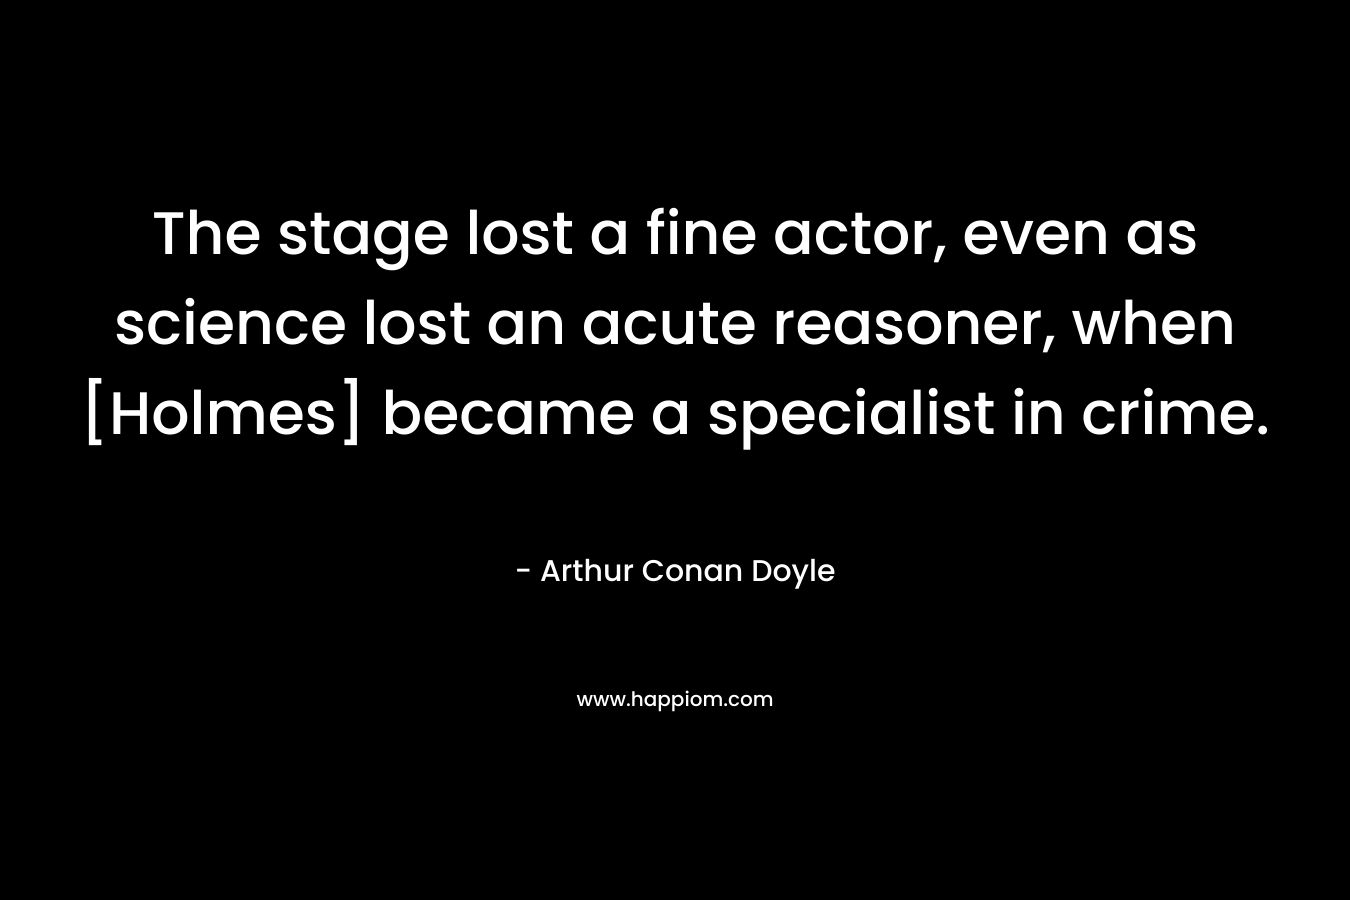 The stage lost a fine actor, even as science lost an acute reasoner, when [Holmes] became a specialist in crime.